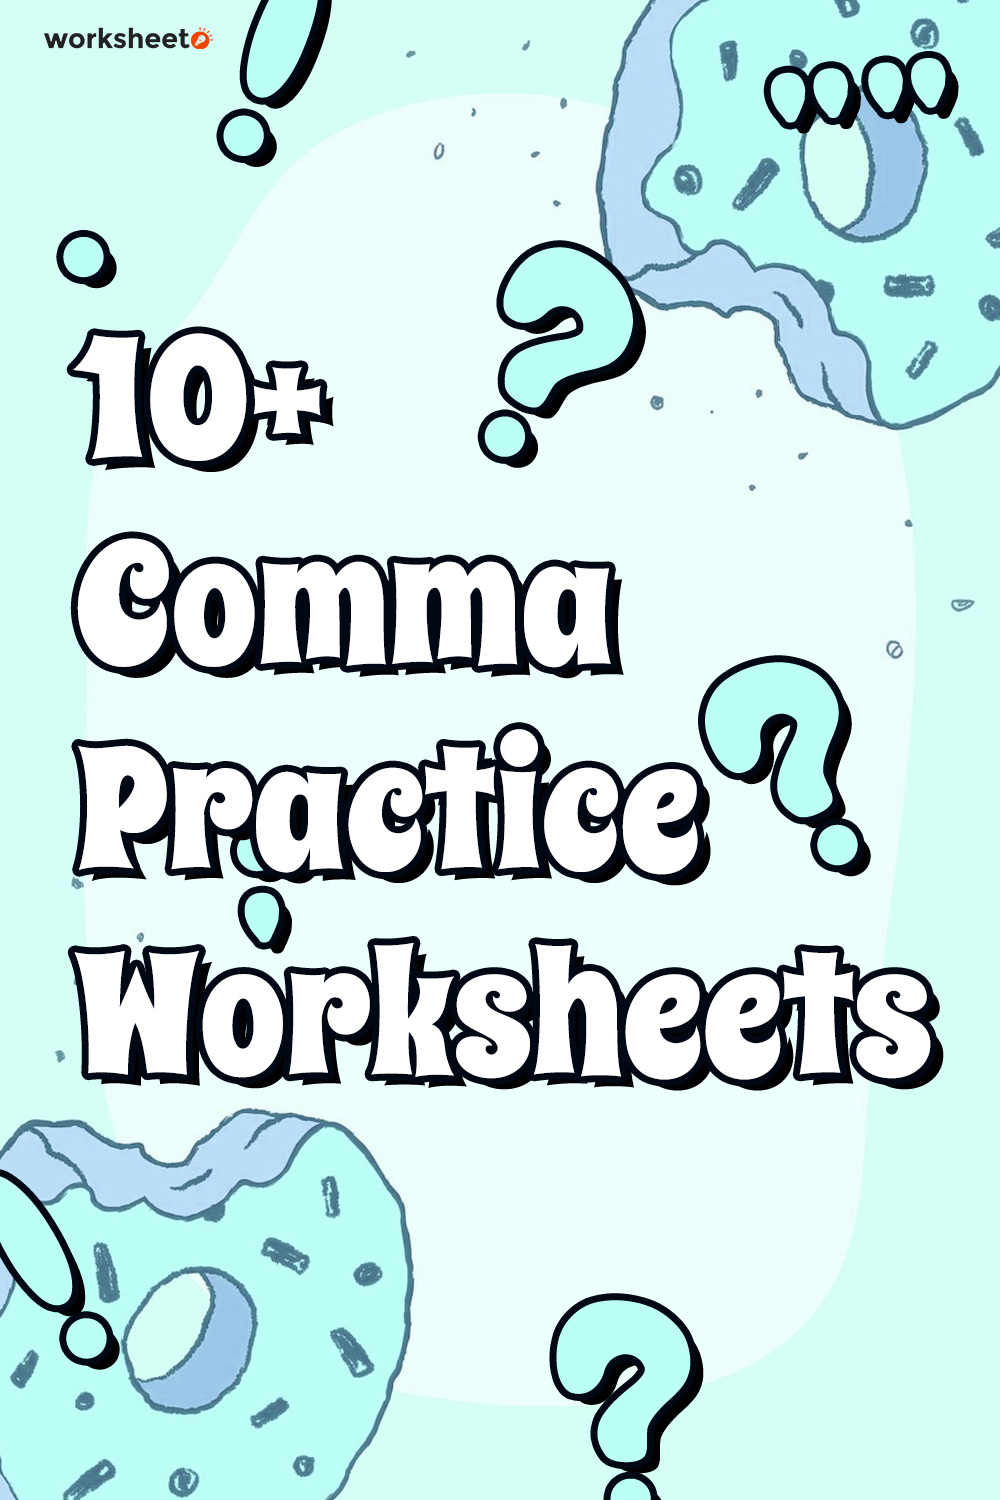 17 Images of Comma Practice Worksheets